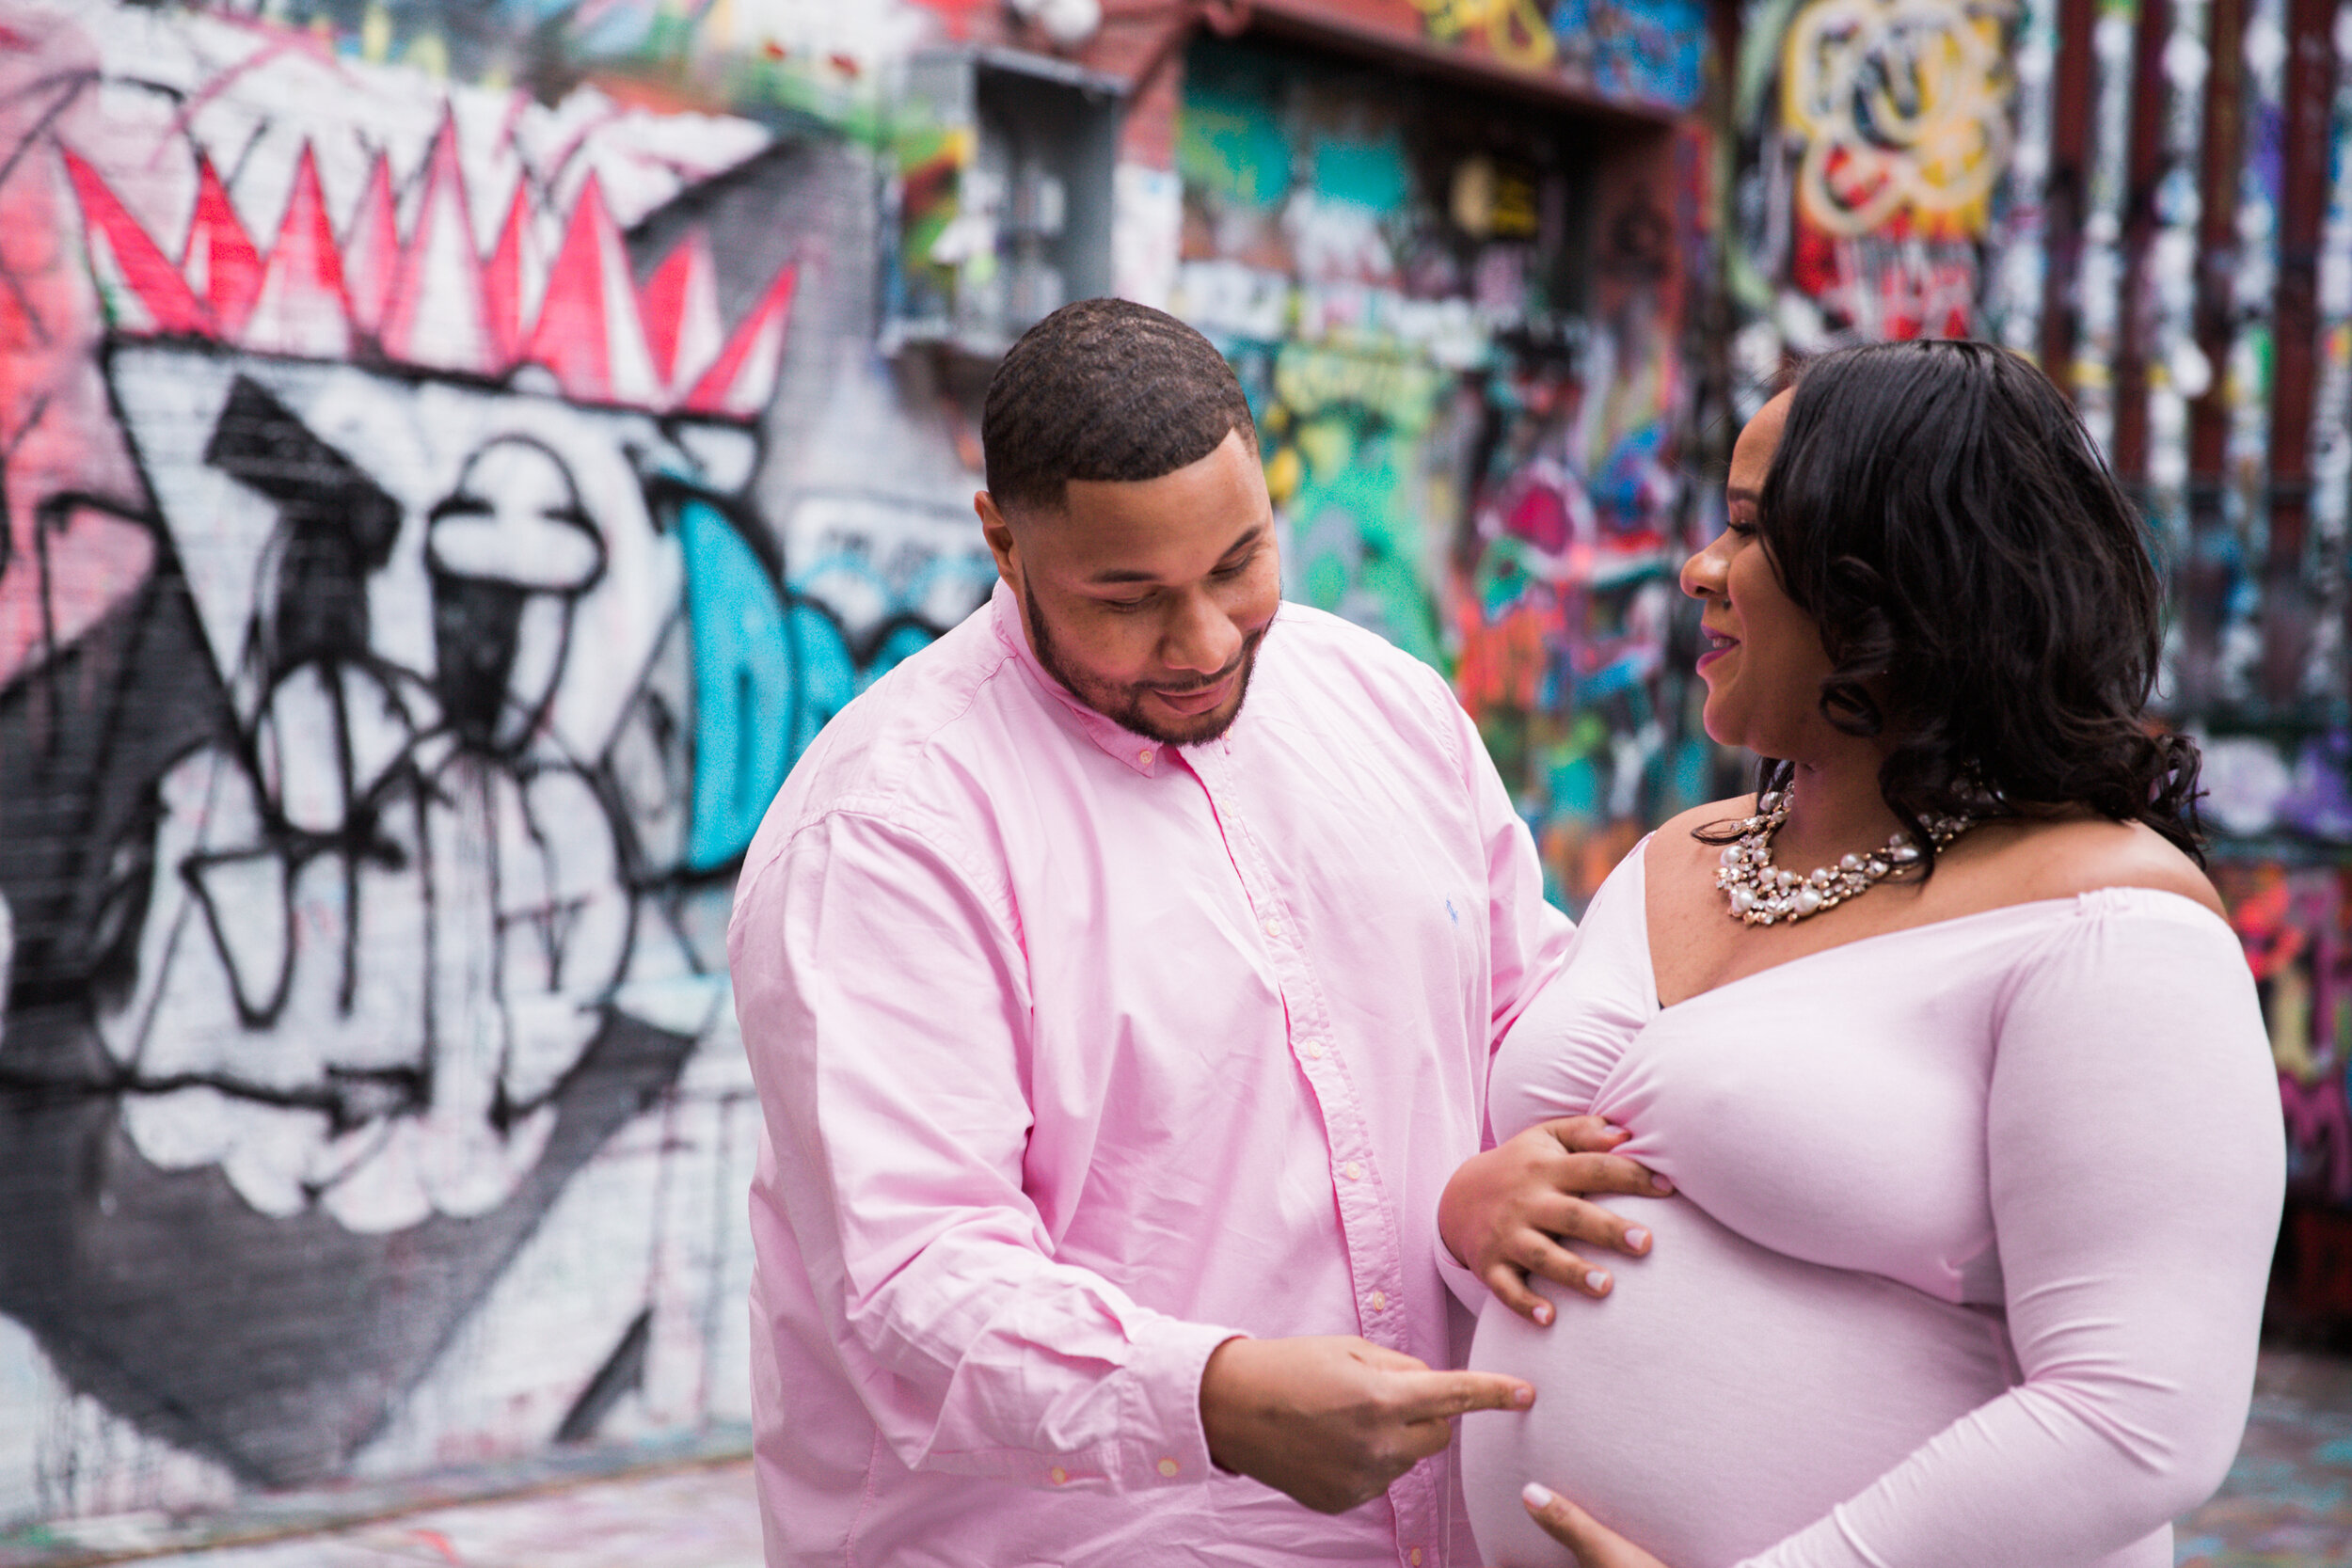 Best Maternity Photographer in Baltimore Maryland Maternity Session at Graffiti Alley in Baltimore Megapixels Media-6.jpg